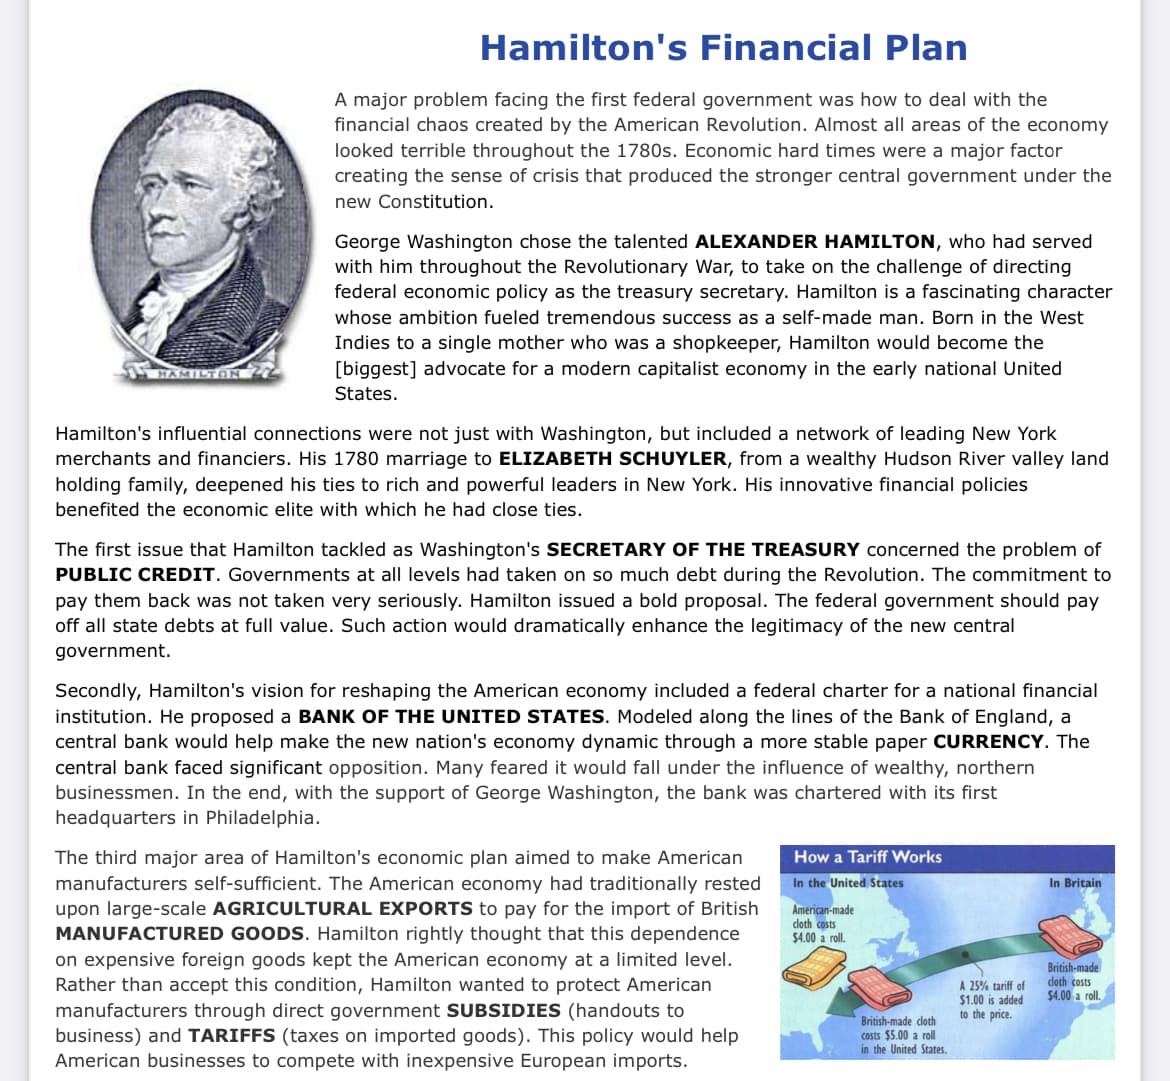 HAMILTON
Hamilton's Financial Plan
A major problem facing the first federal government was how to deal with the
financial chaos created by the American Revolution. Almost all areas of the economy
looked terrible throughout the 1780s. Economic hard times were a major factor
creating the sense of crisis that produced the stronger central government under the
new Constitution.
George Washington chose the talented ALEXANDER HAMILTON, who had served
with him throughout the Revolutionary War, to take on the challenge of directing
federal economic policy as the treasury secretary. Hamilton is a fascinating character
whose ambition fueled tremendous success as a self-made man. Born in the West
Indies to a single mother who was a shopkeeper, Hamilton would become the
[biggest] advocate for a modern capitalist economy in the early national United
States.
Hamilton's influential connections were not just with Washington, but included a network of leading New York
merchants and financiers. His 1780 marriage to ELIZABETH SCHUYLER, from a wealthy Hudson River valley land
holding family, deepened his ties to rich and powerful leaders in New York. His innovative financial policies
benefited the economic elite with which he had close ties.
The first issue that Hamilton tackled as Washington's SECRETARY OF THE TREASURY concerned the problem of
PUBLIC CREDIT. Governments at all levels had taken on so much debt during the Revolution. The commitment to
pay them back was not taken very seriously. Hamilton issued a bold proposal. The federal government should pay
off all state debts at full value. Such action would dramatically enhance the legitimacy of the new central
government.
Secondly, Hamilton's vision for reshaping the American economy included a federal charter for a national financial
institution. He proposed a BANK OF THE UNITED STATES. Modeled along the lines of the Bank of England, a
central bank would help make the new nation's economy dynamic through a more stable paper CURRENCY. The
central bank faced significant opposition. Many feared it would fall under the influence of wealthy, northern
businessmen. In the end, with the support of George Washington, the bank was chartered with its first
headquarters in Philadelphia.
The third major area of Hamilton's economic plan aimed to make American
manufacturers self-sufficient. The American economy had traditionally rested
upon large-scale AGRICULTURAL EXPORTS to pay for the import of British
MANUFACTURED GOODS. Hamilton rightly thought that this dependence
on expensive foreign goods kept the American economy at a limited level.
Rather than accept this condition, Hamilton wanted to protect American
manufacturers through direct government SUBSIDIES (handouts to
business) and TARIFFS (taxes on imported goods). This policy would help
American businesses to compete with inexpensive European imports.
How a Tariff Works
In the United States
American-made
cloth costs
$4.00 a roll.
British-made cloth
costs $5.00 a roll
in the United States.
A 25% tariff of
$1.00 is added
to the price.
In Britain
British-made
cloth costs
$4.00 a roll.